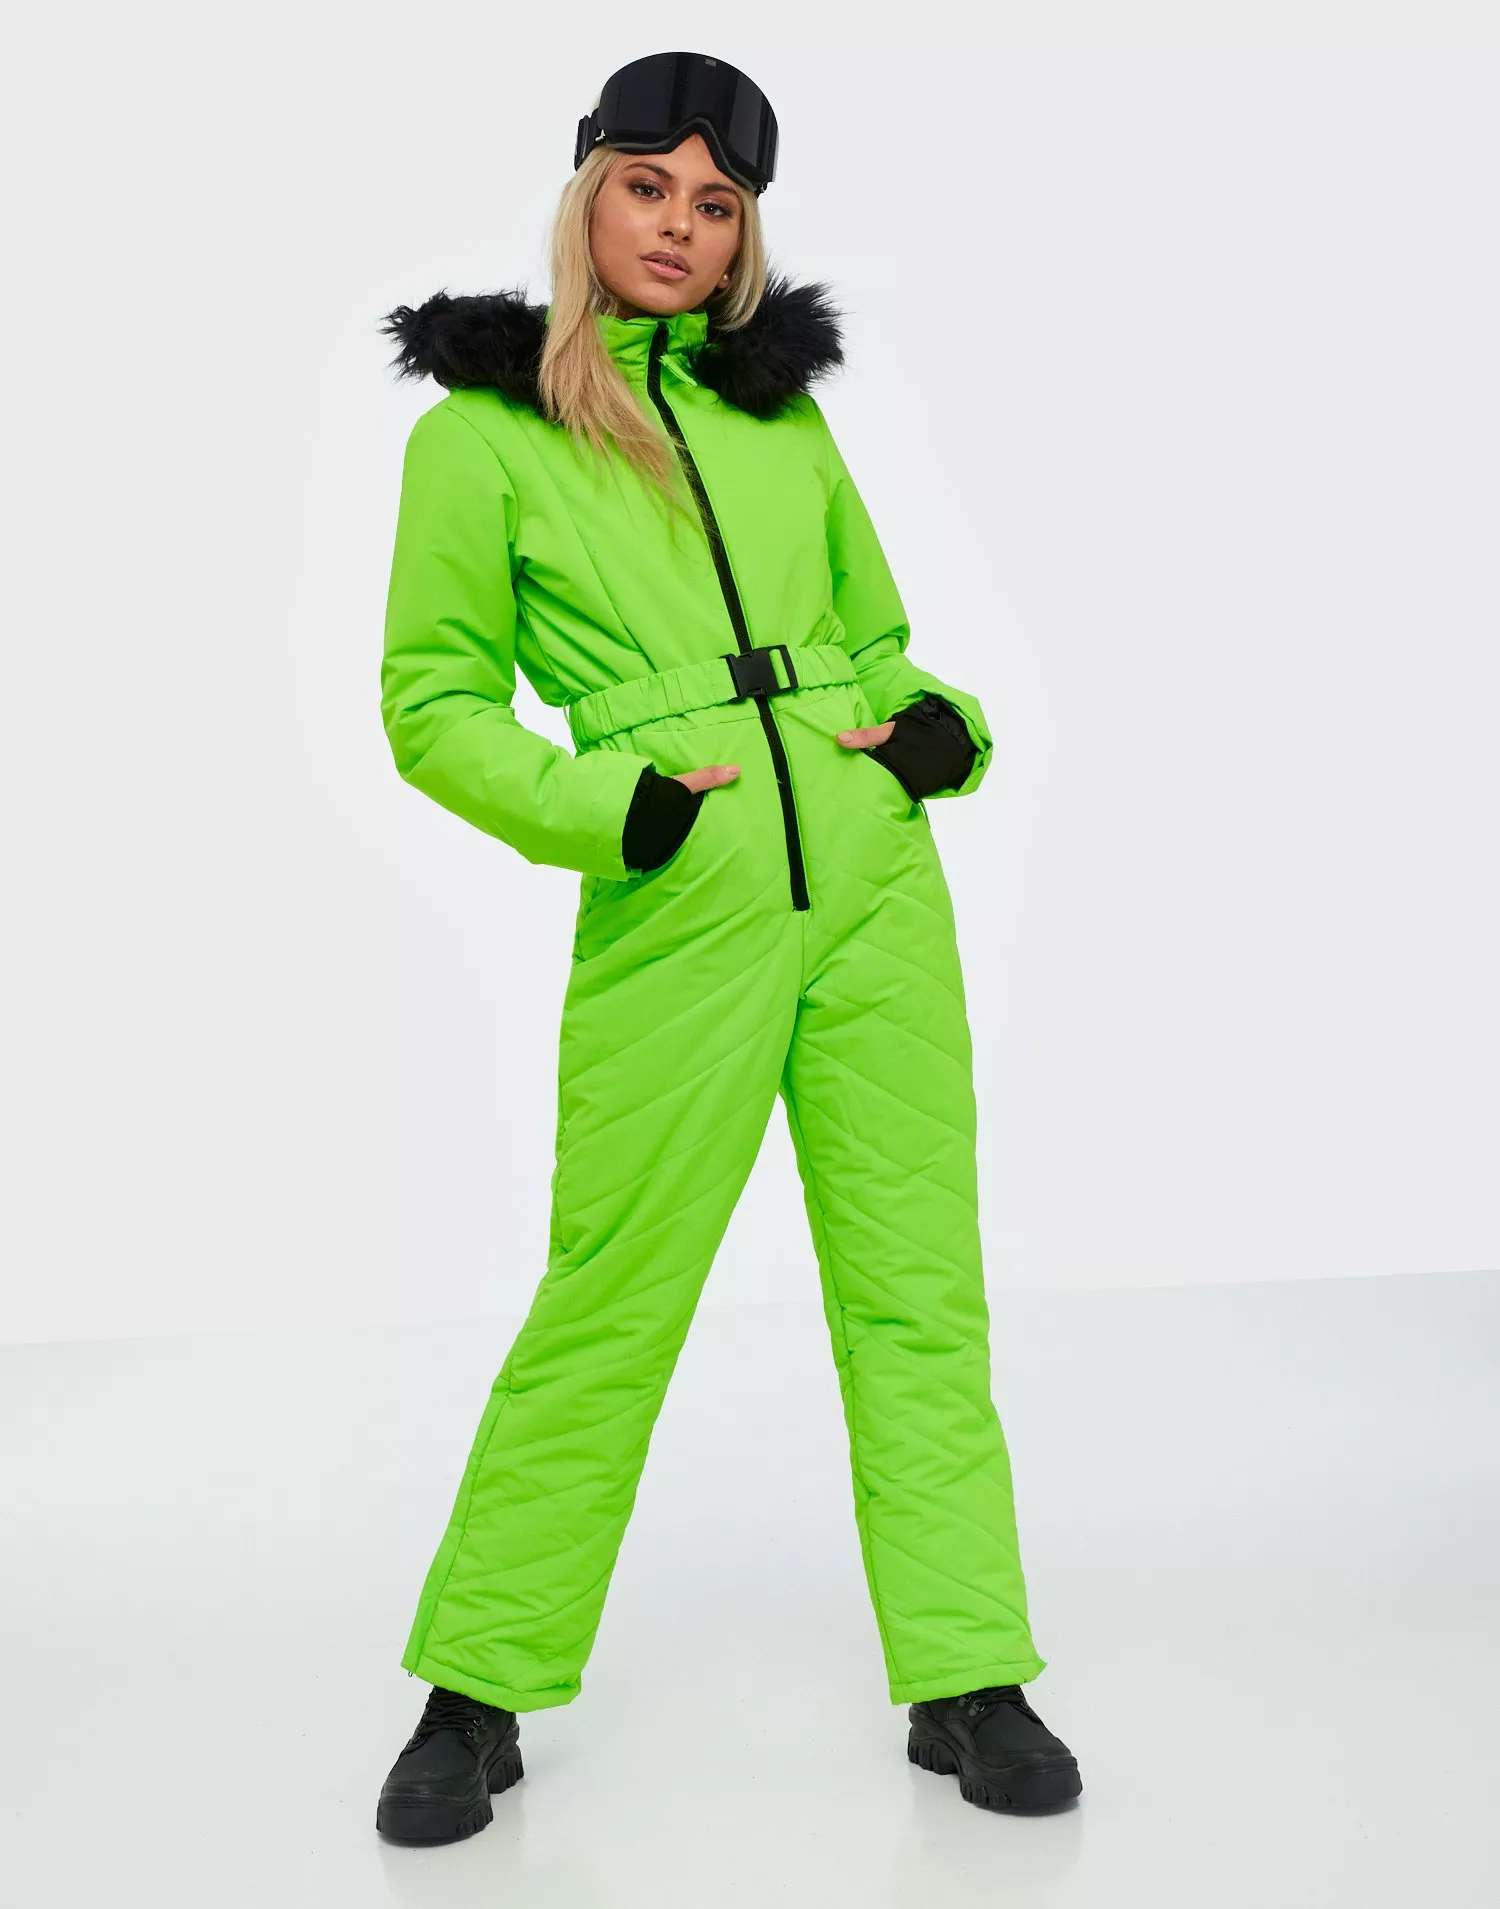 Ski suit - Missguided ski suit, very warm and